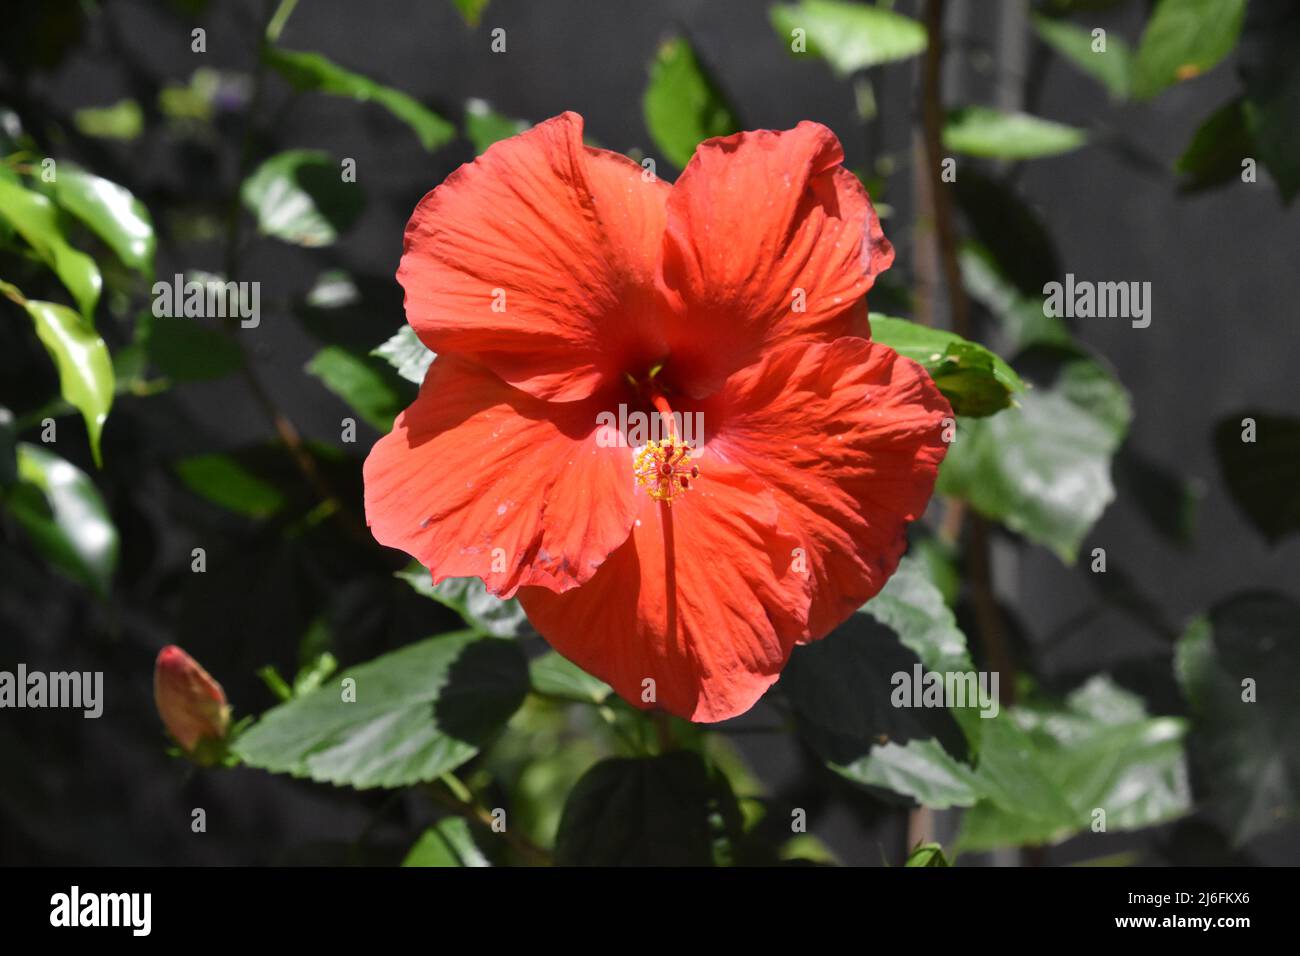 Brilliant red hibiscus flower blooming and flowering in a garden. Stock Photo